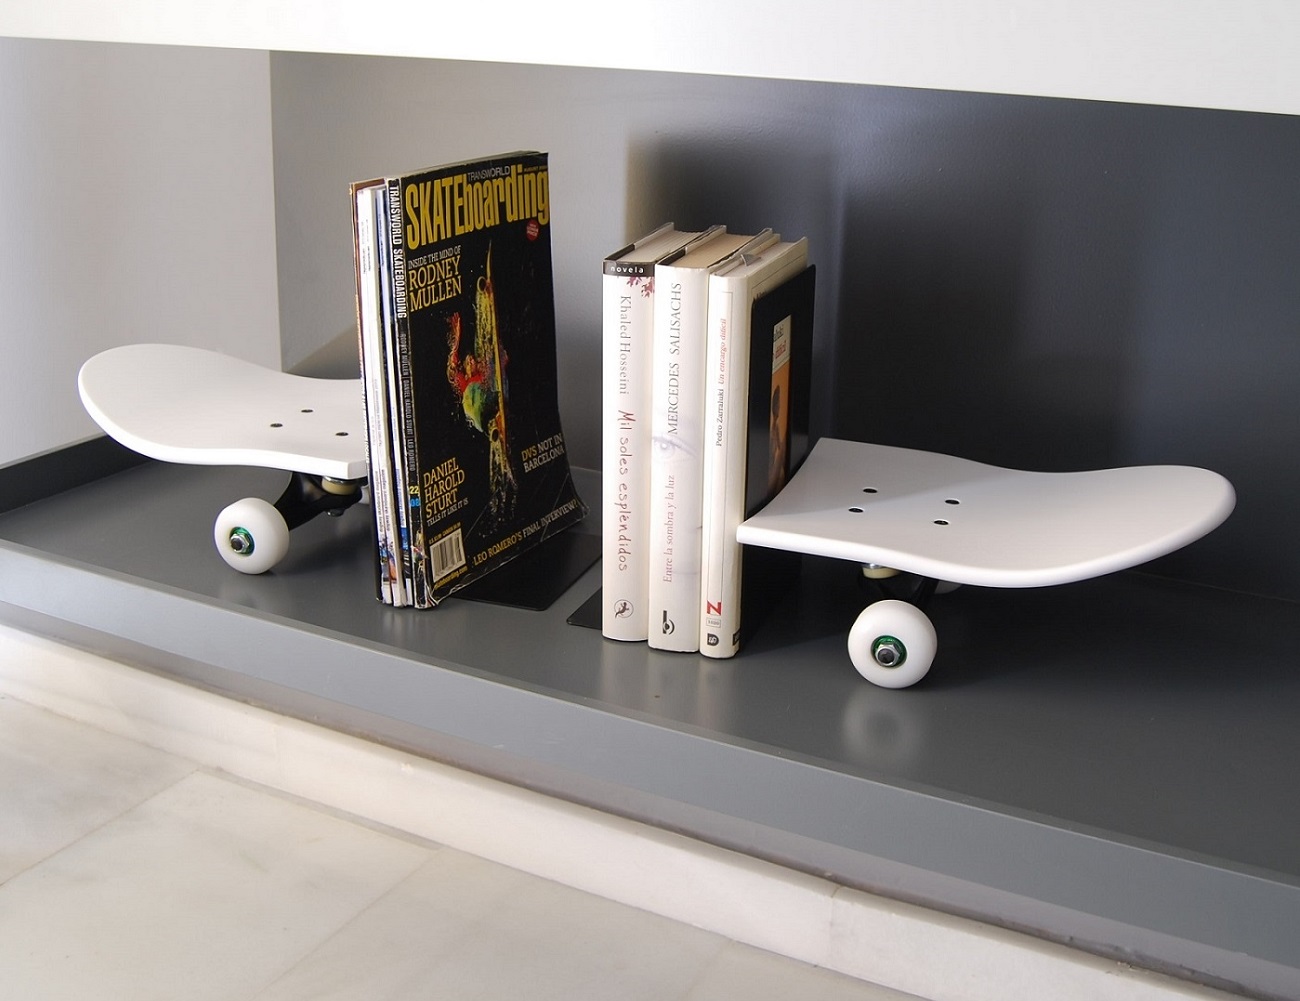 Tail and Nose Bookends by Skate-Home